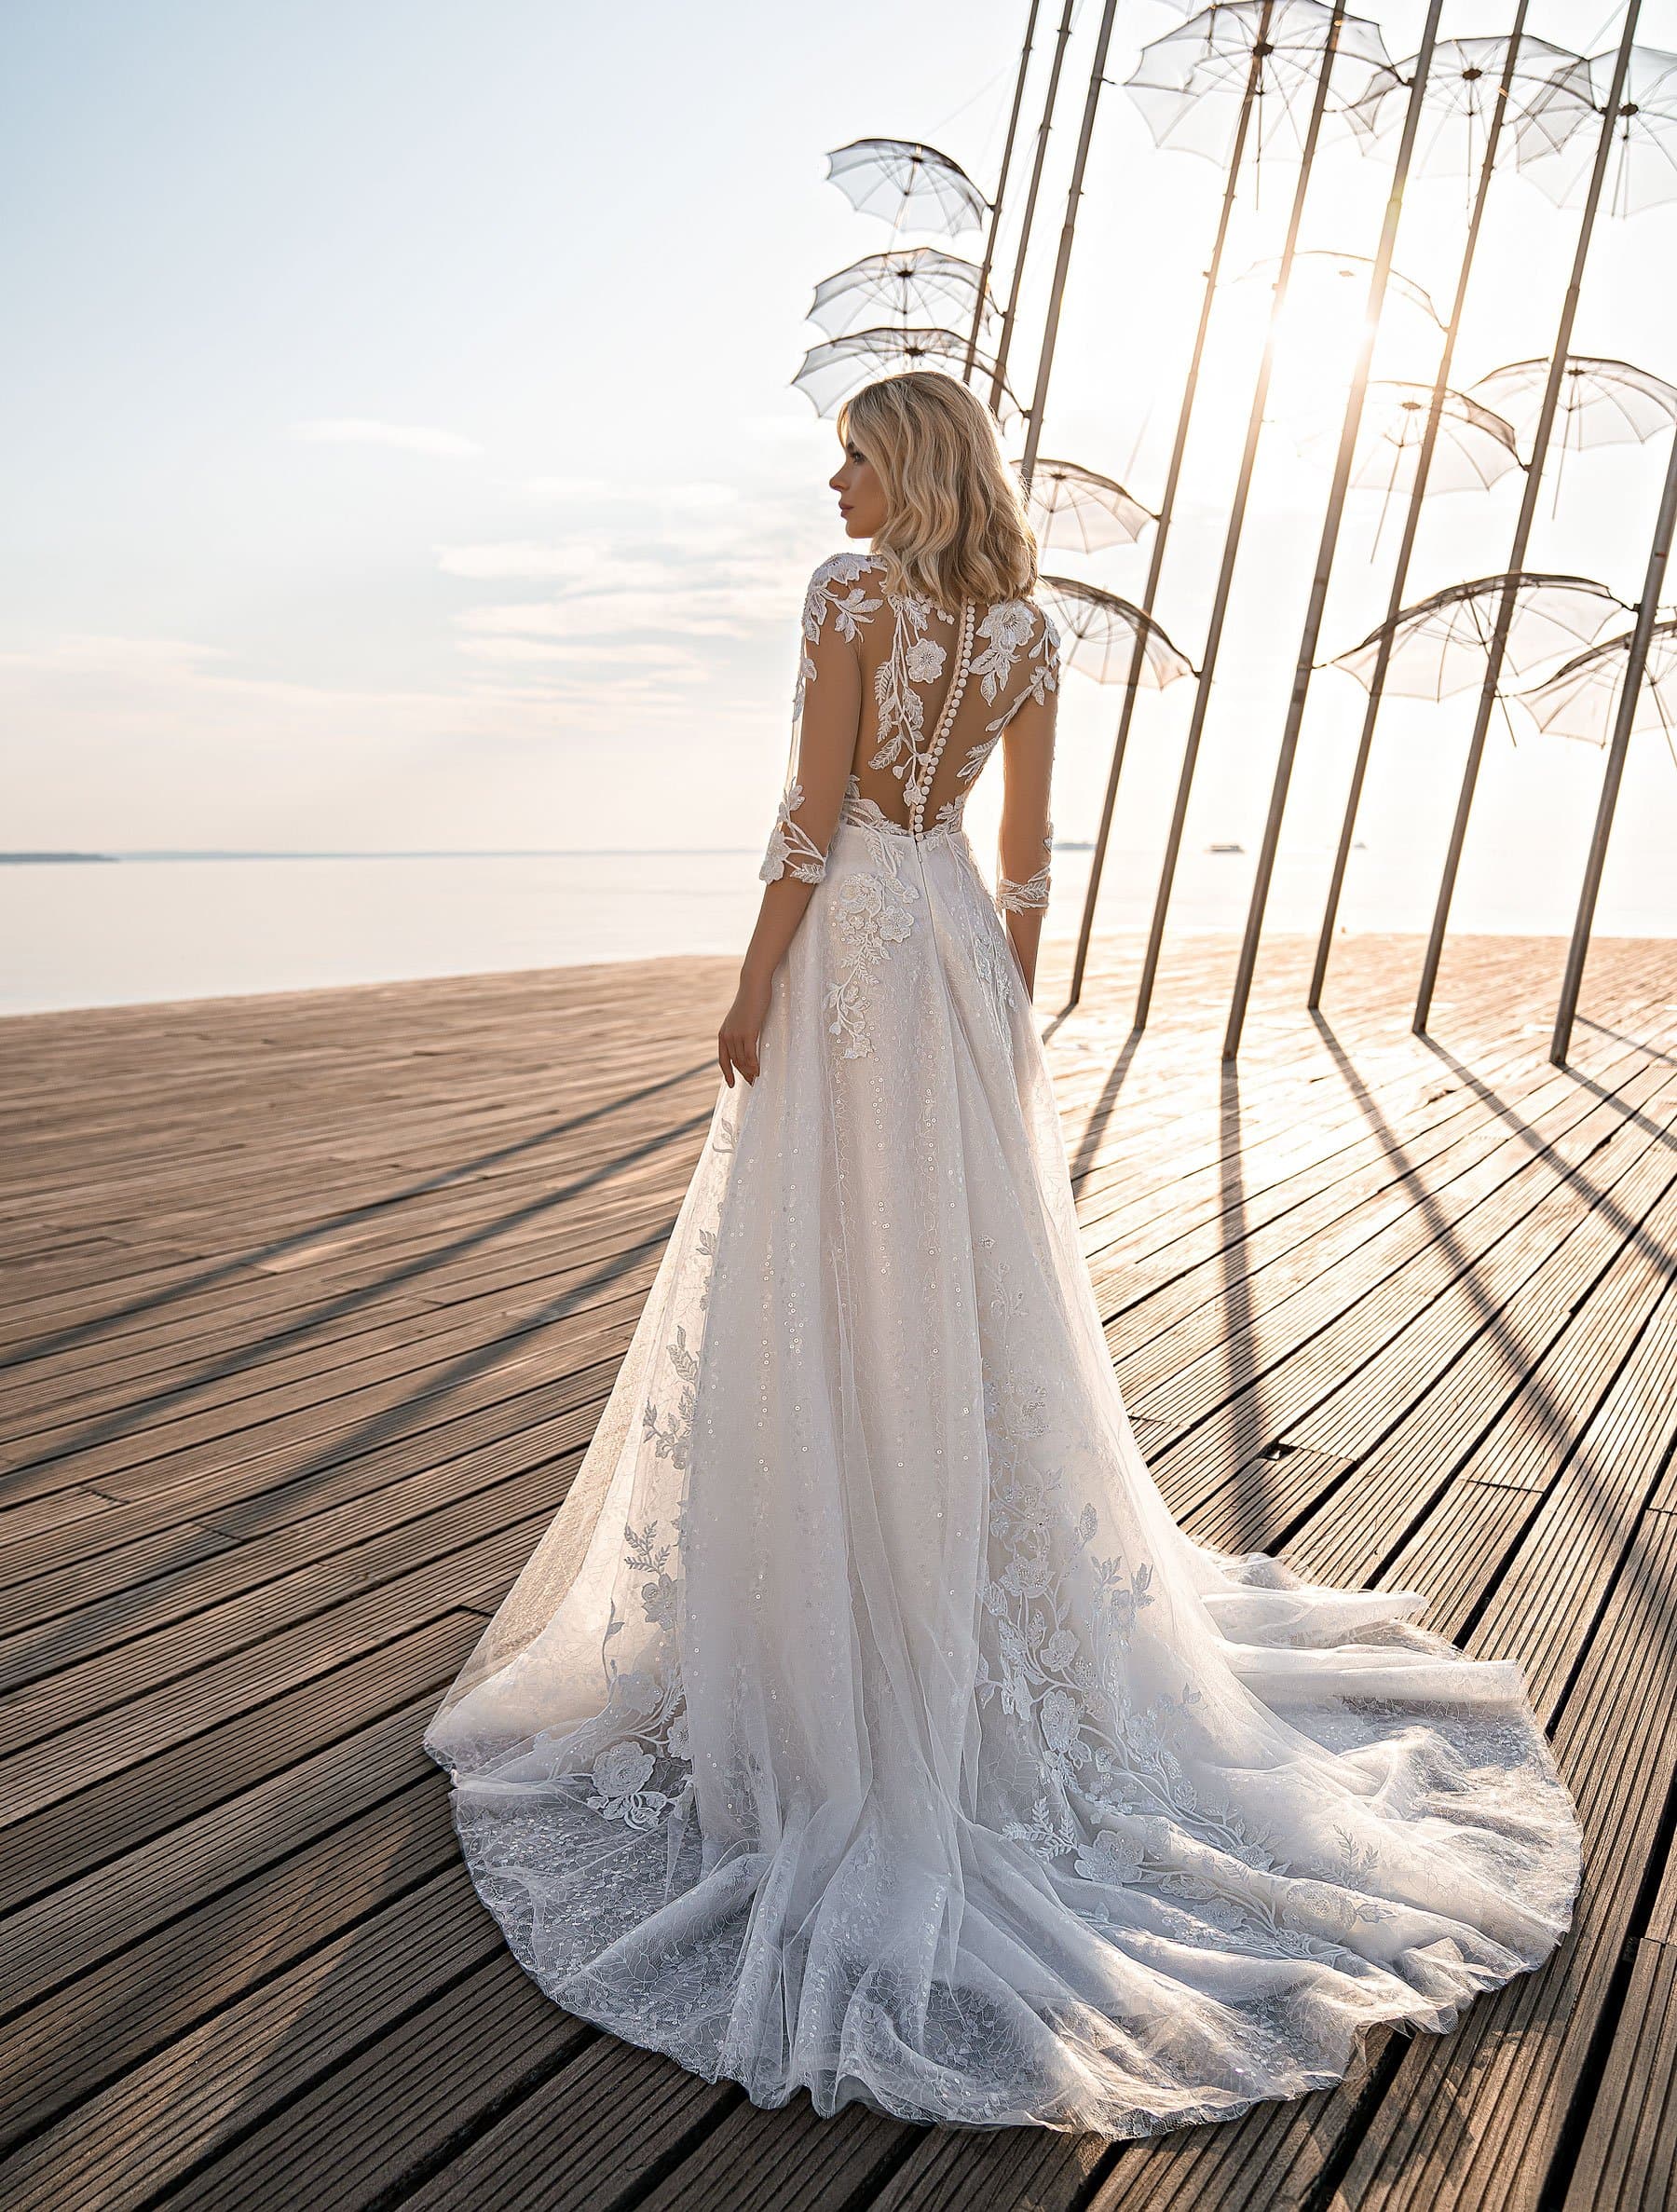 Wedding dress Aurora Product for Sale at NY City Bride